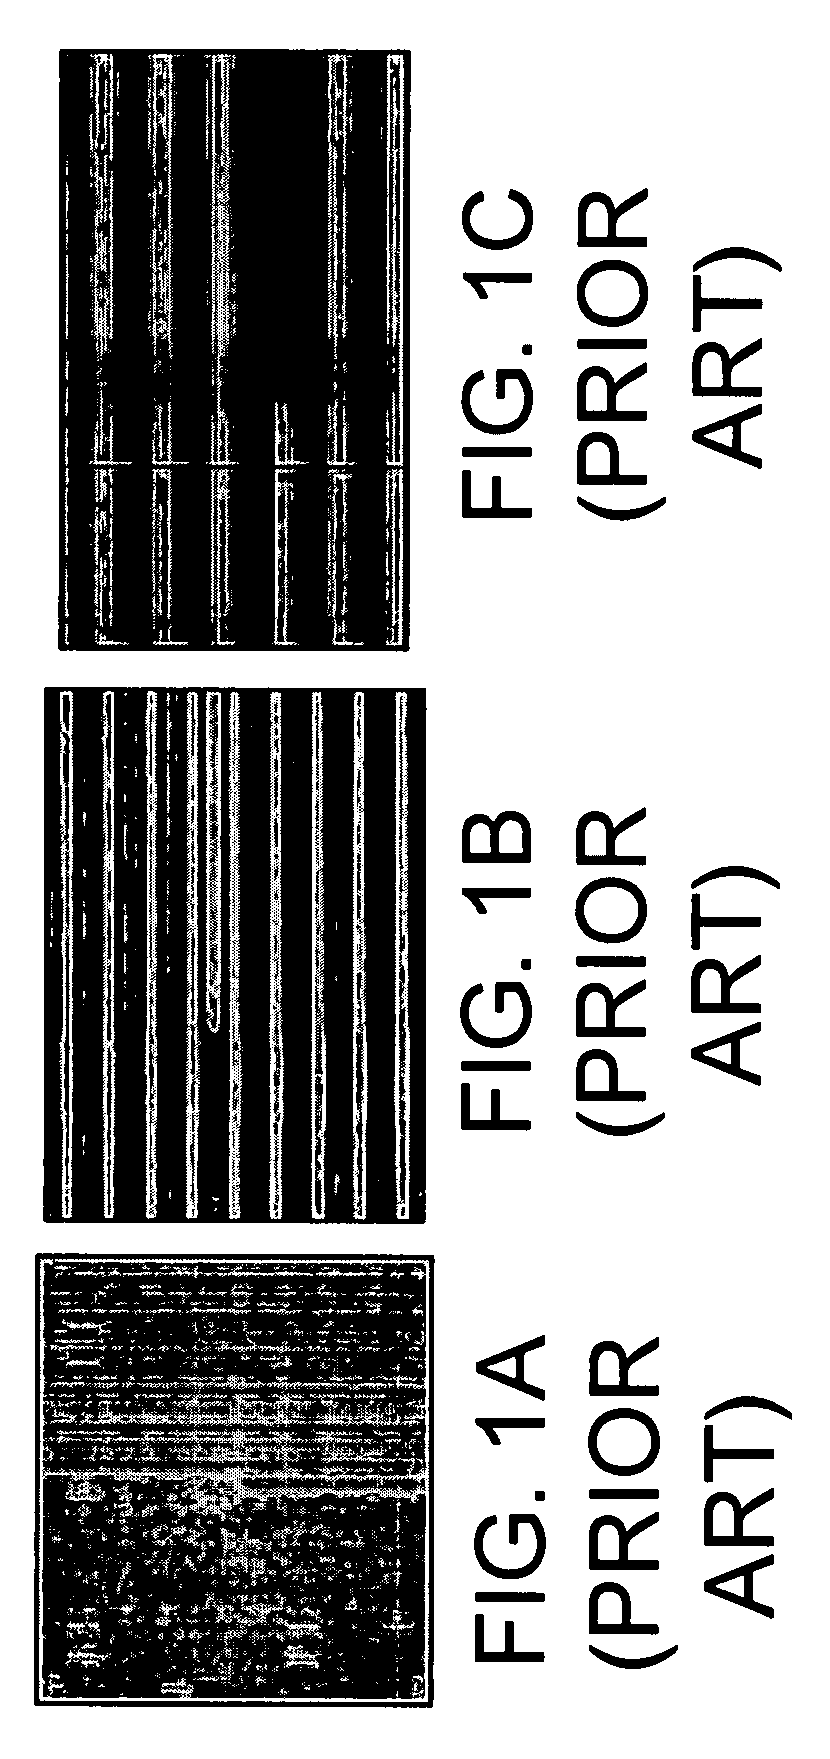 Test structure for resistive open detection using voltage contrast inspection and related methods